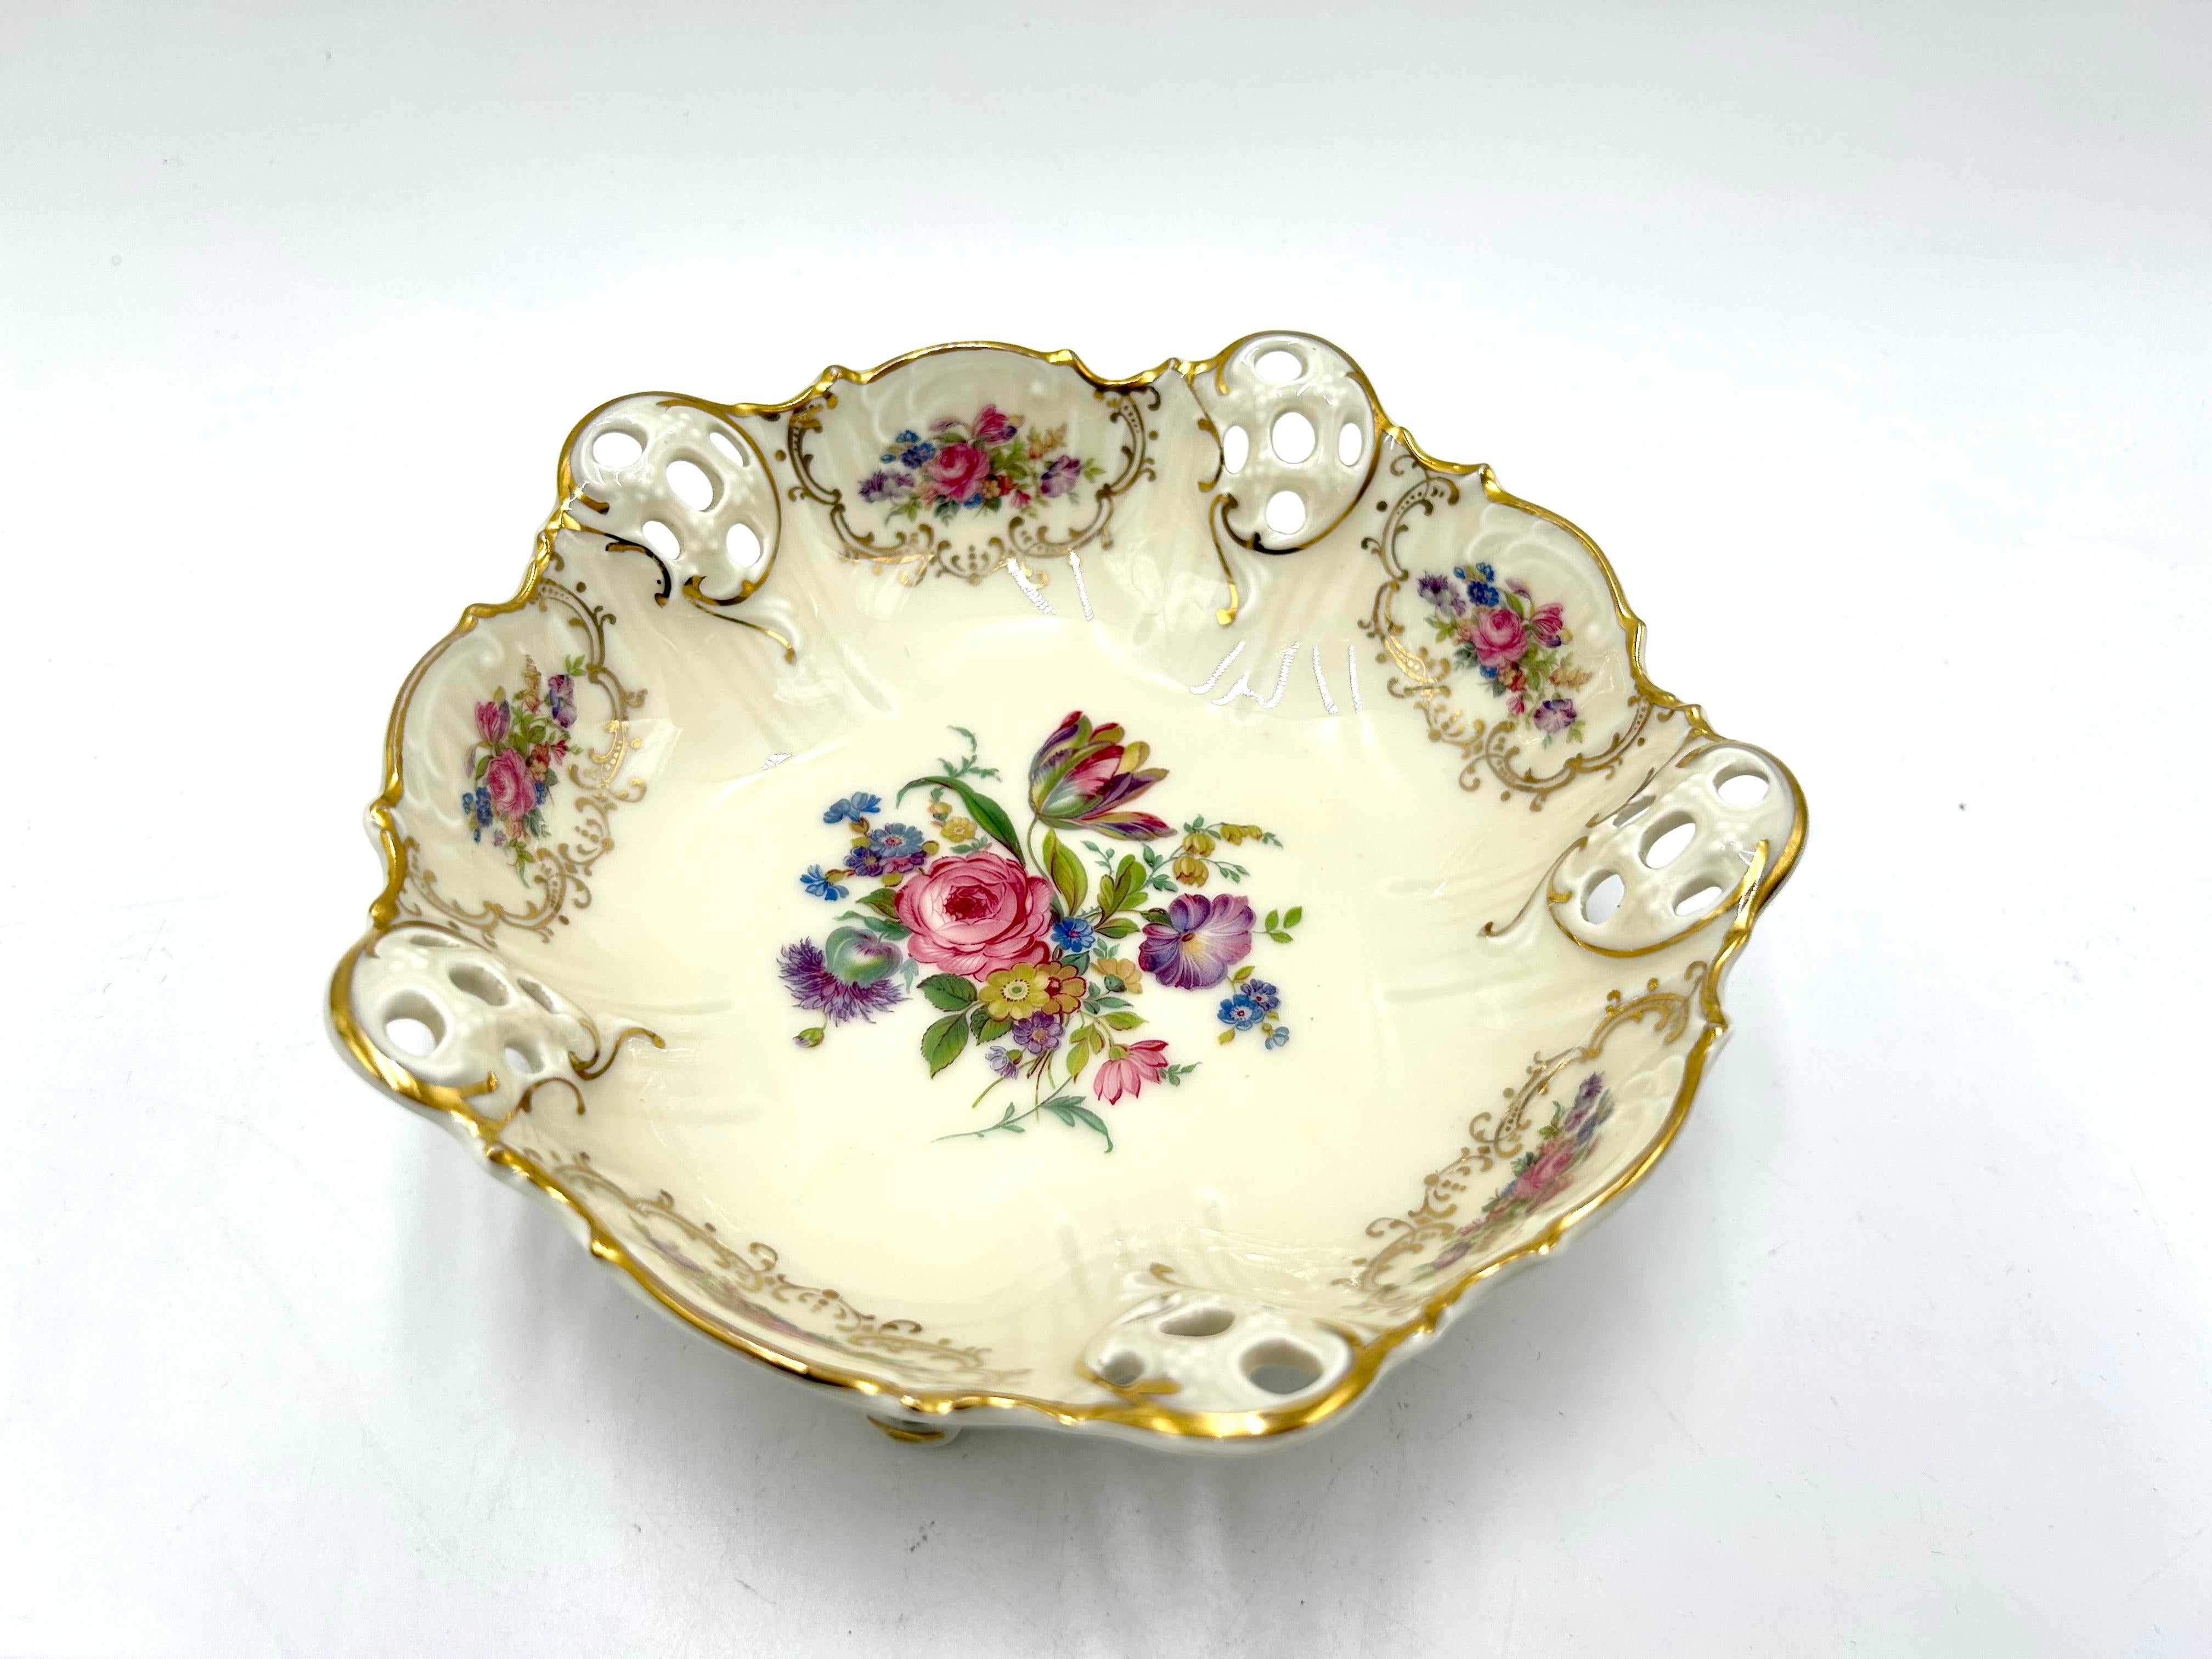 Openwork plate supported on three filigree legs from the Moliere collection, the renowned German Rosenthal label. The product is marked with the mark used in 1957. Ecru porcelain decorated with openwork sides, floral bouquets and gilded